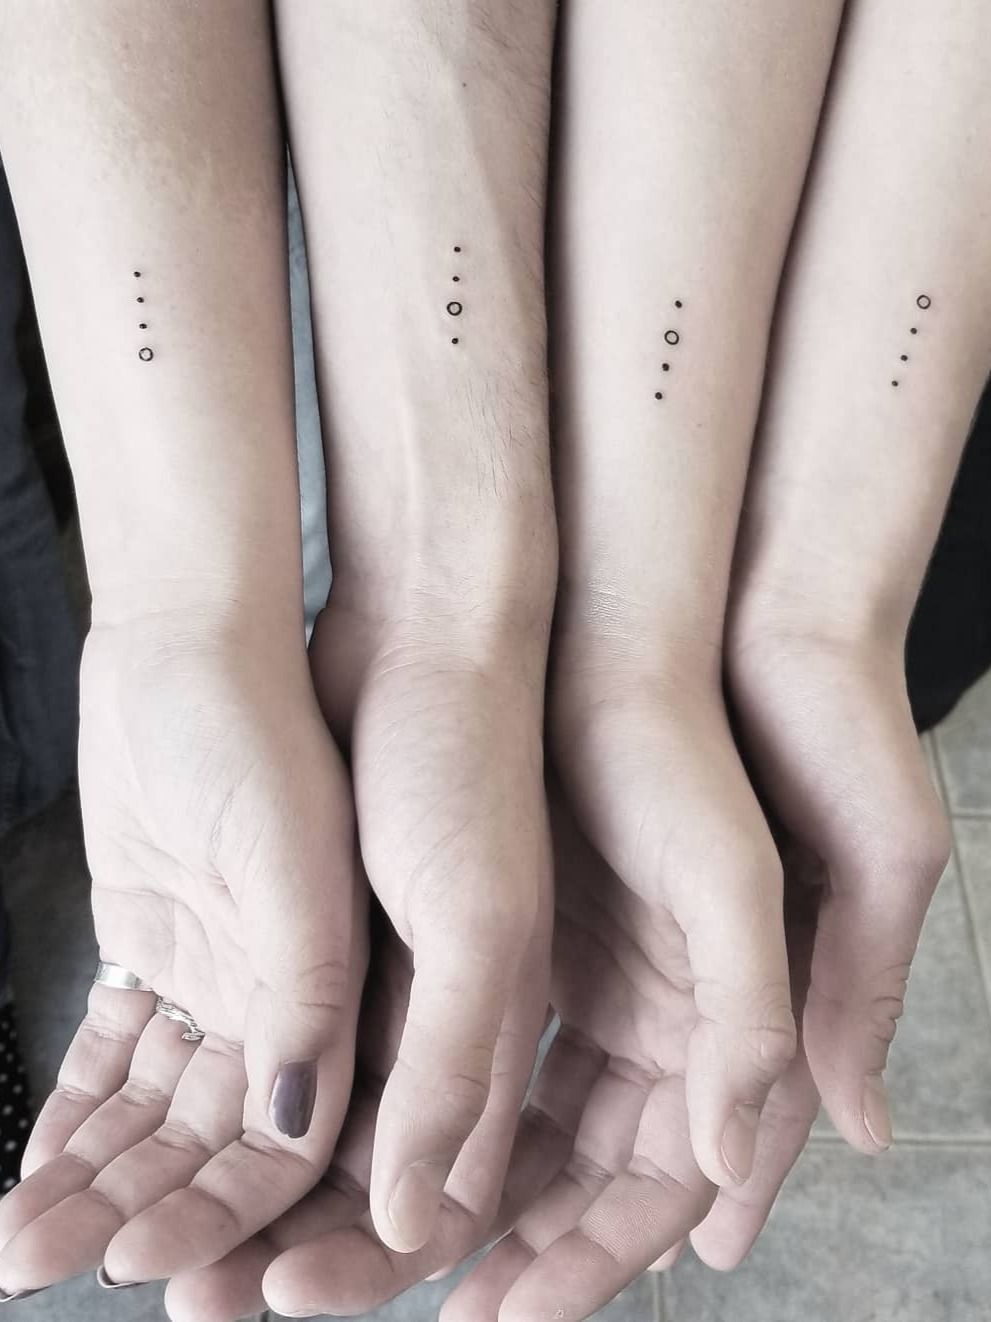 Tattoos For 3 Siblings | Ideas and Inspiration | POPSUGAR Beauty UK